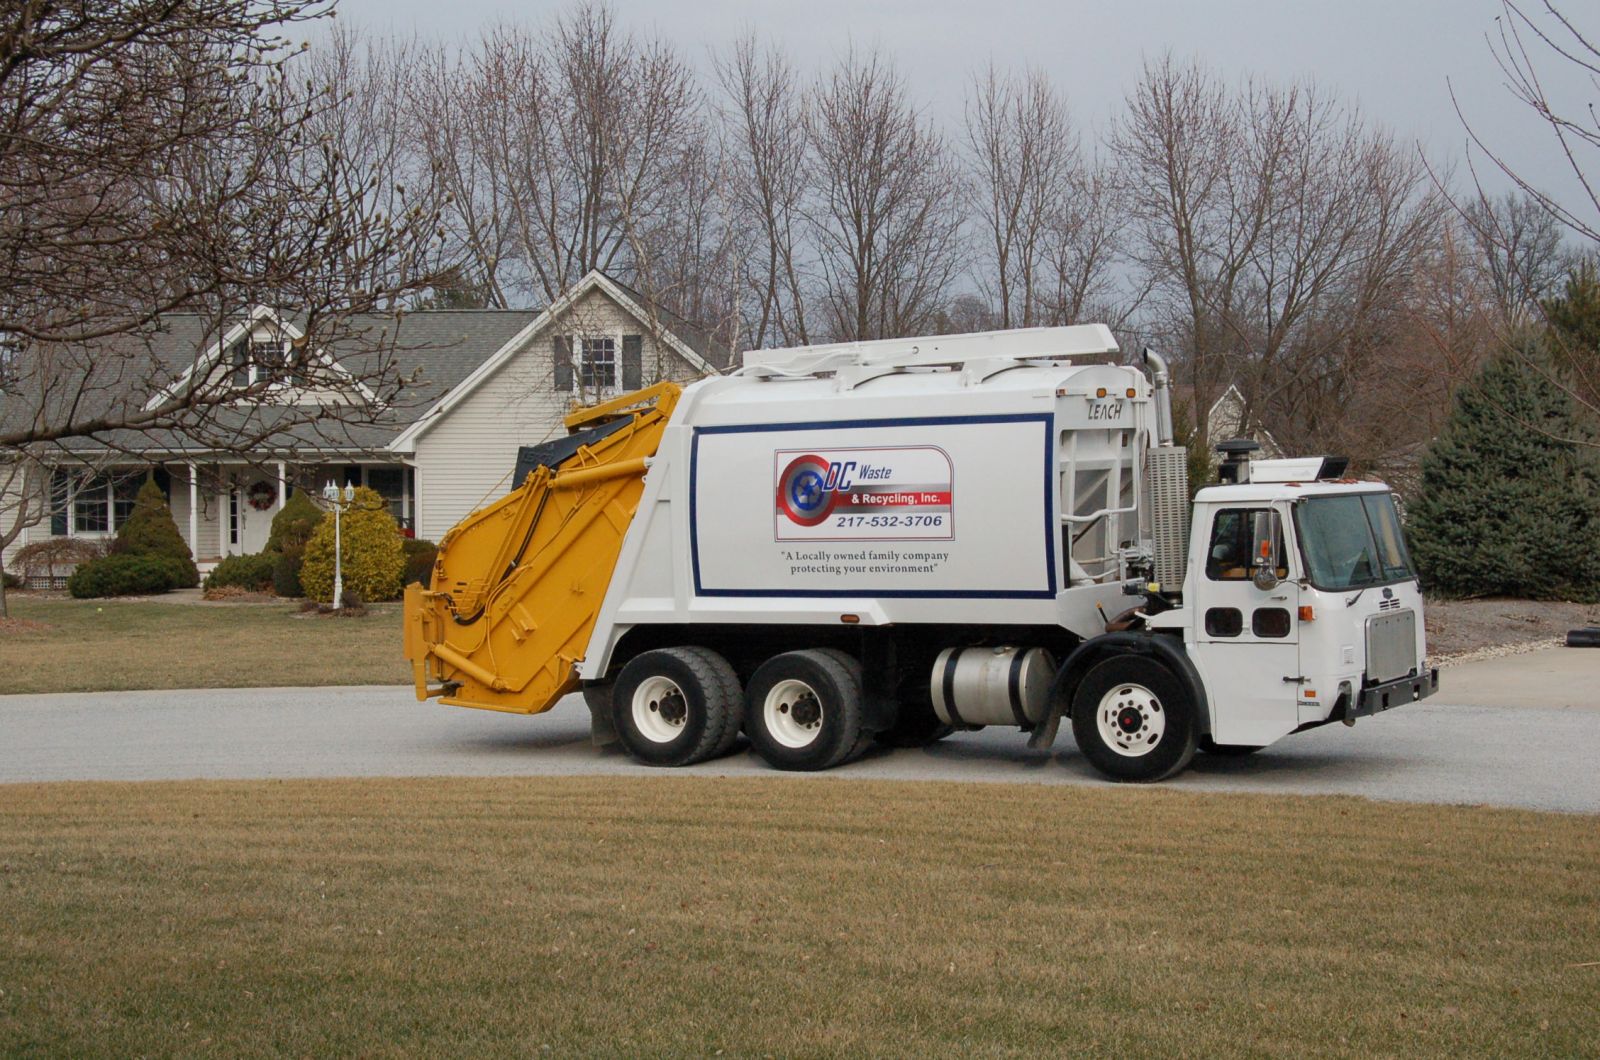 Residential Garbage Pick-up & Trash Services - DC Waste